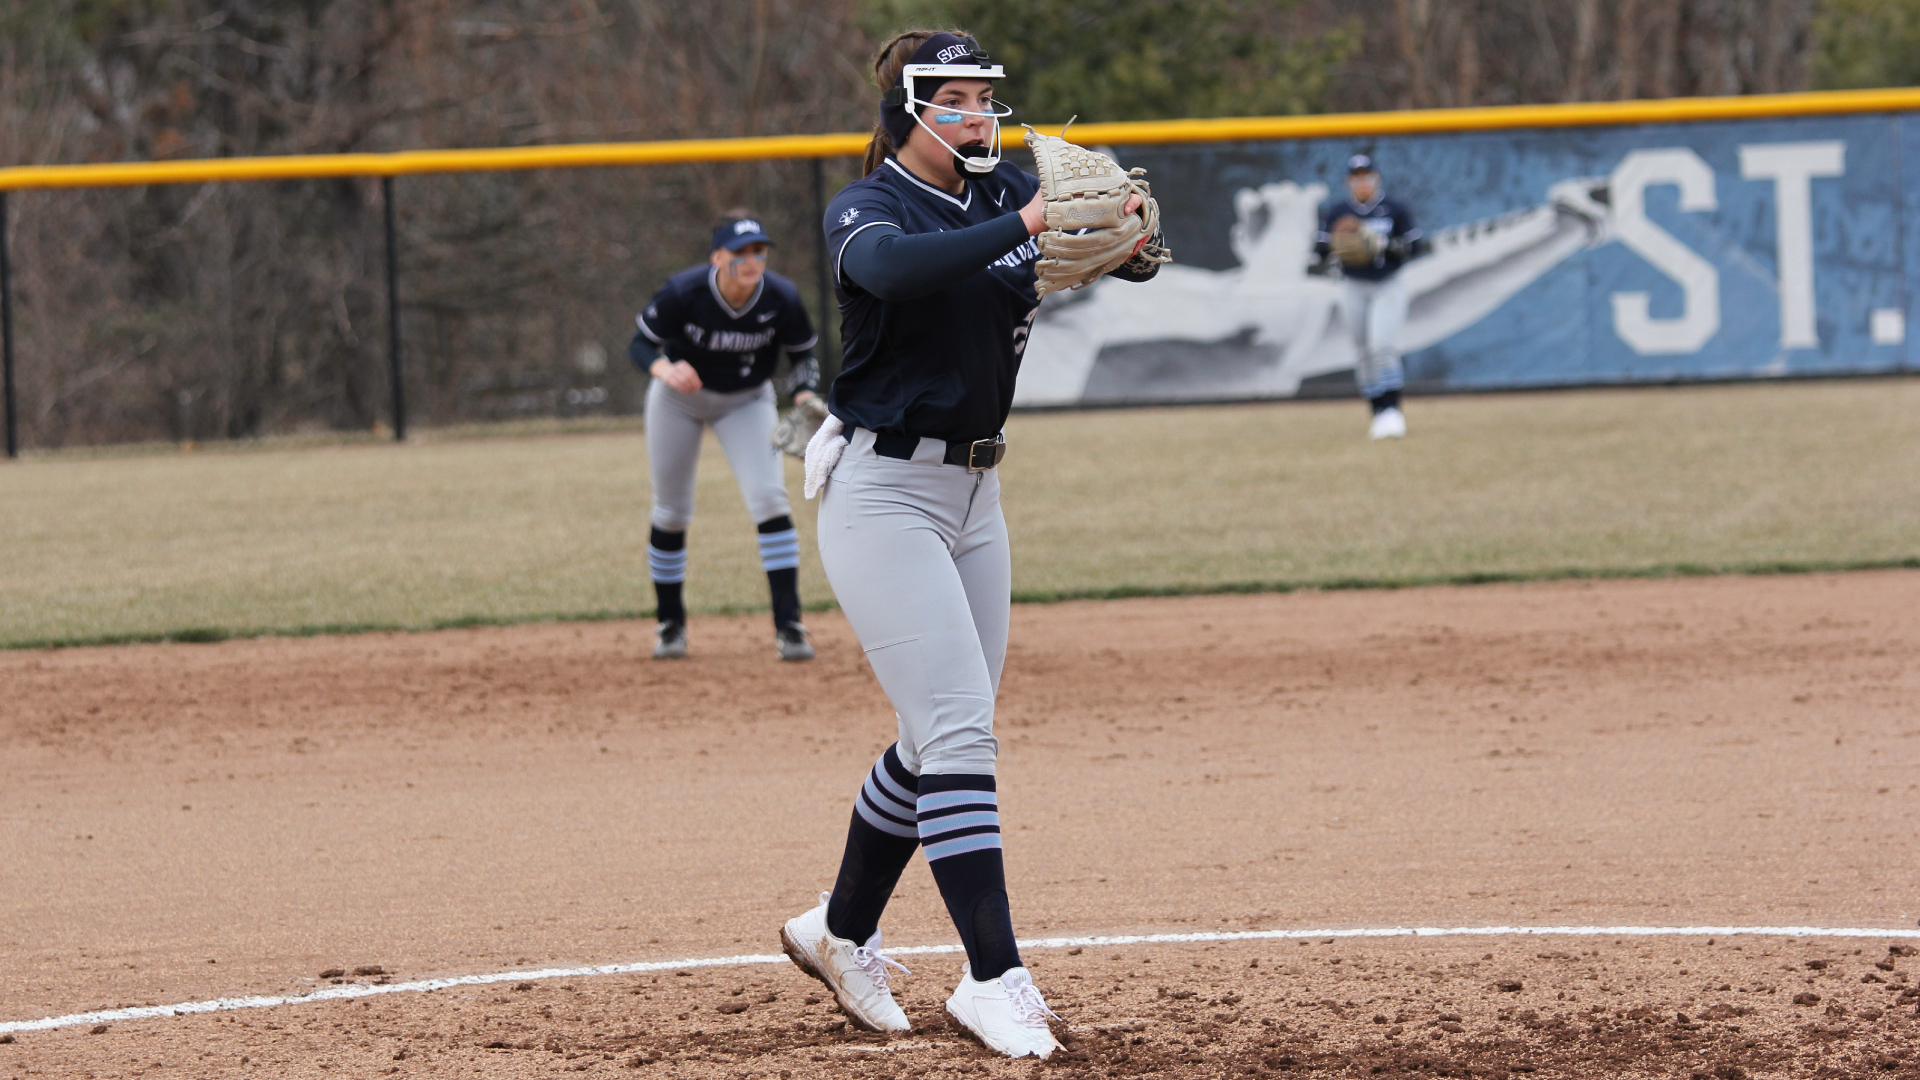 SAU moves to 5-1 in CCAC play by sweeping CCSJ